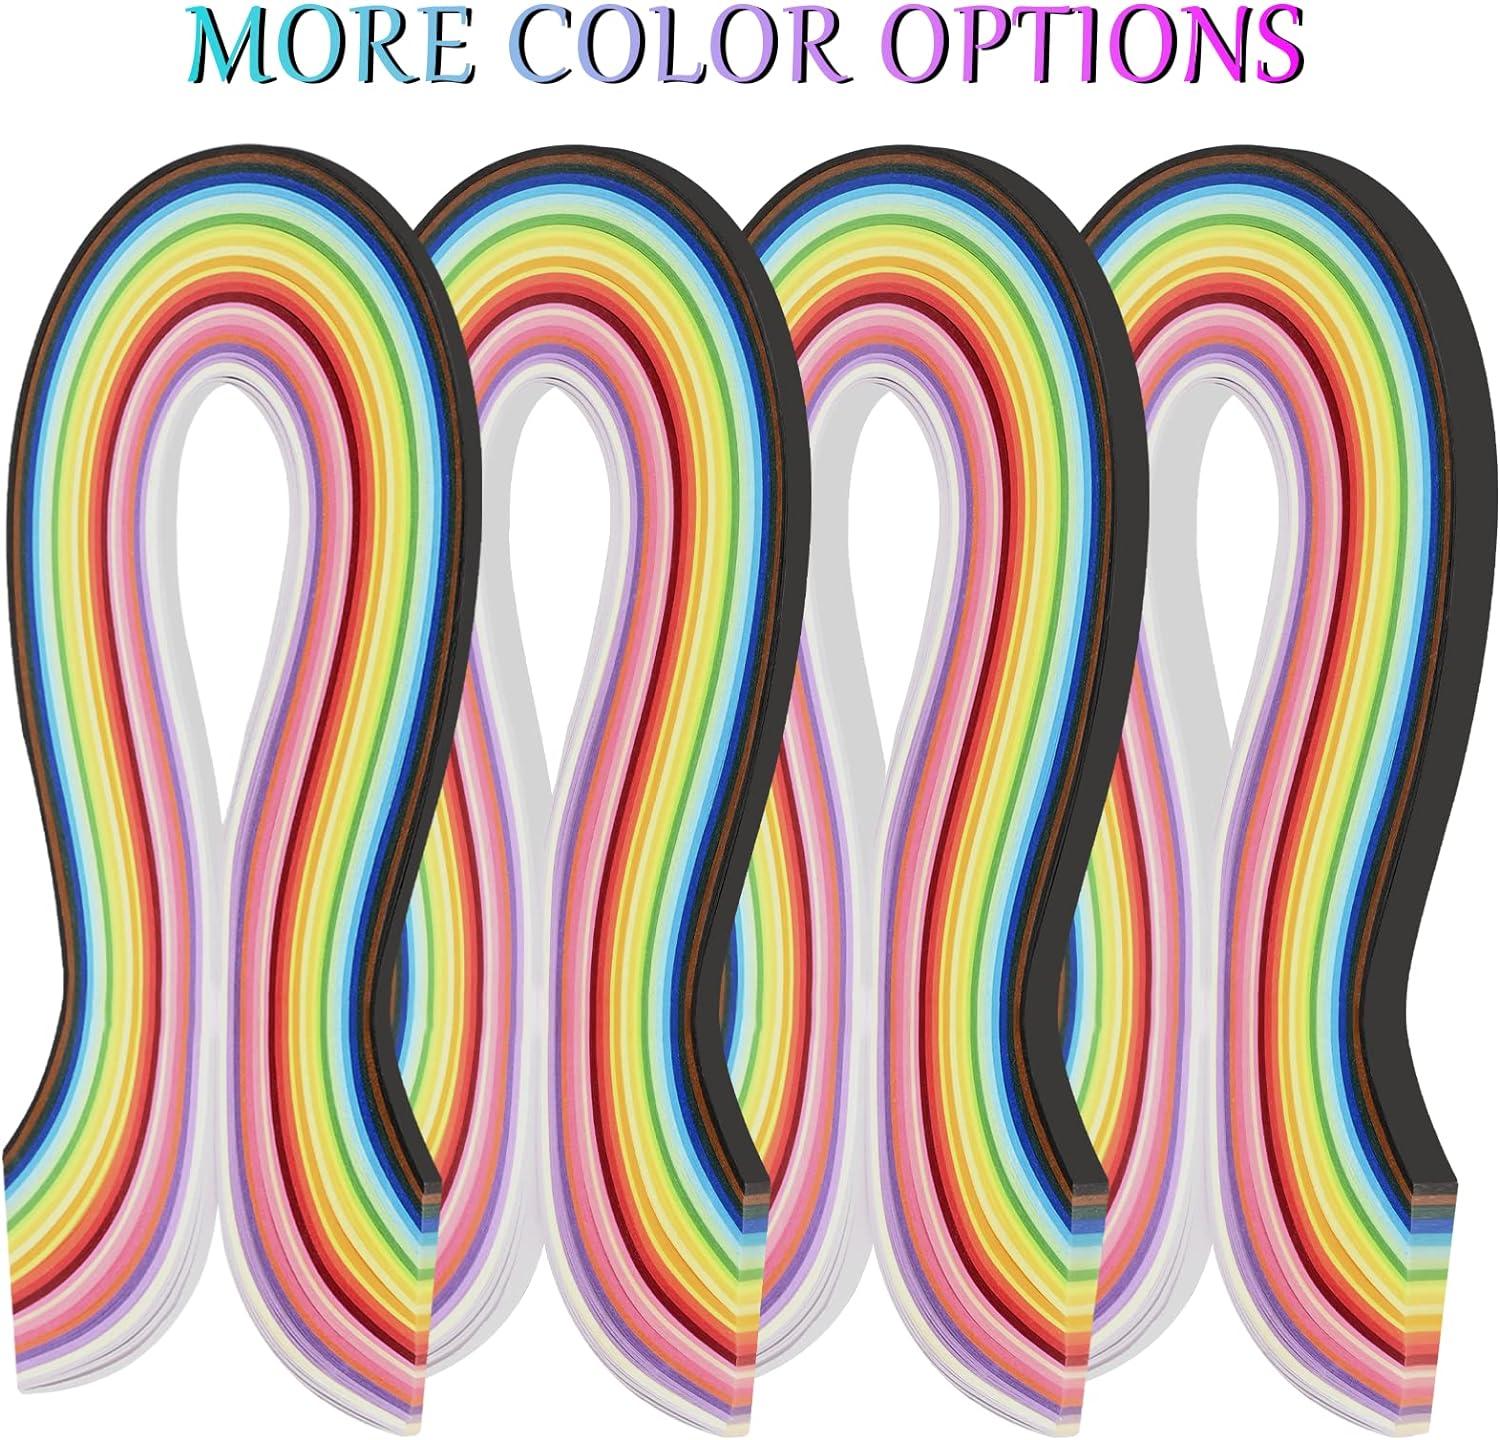 180 Quilling Paper Strips 3mm, 36 Colors Quill Paper Quilling Kit